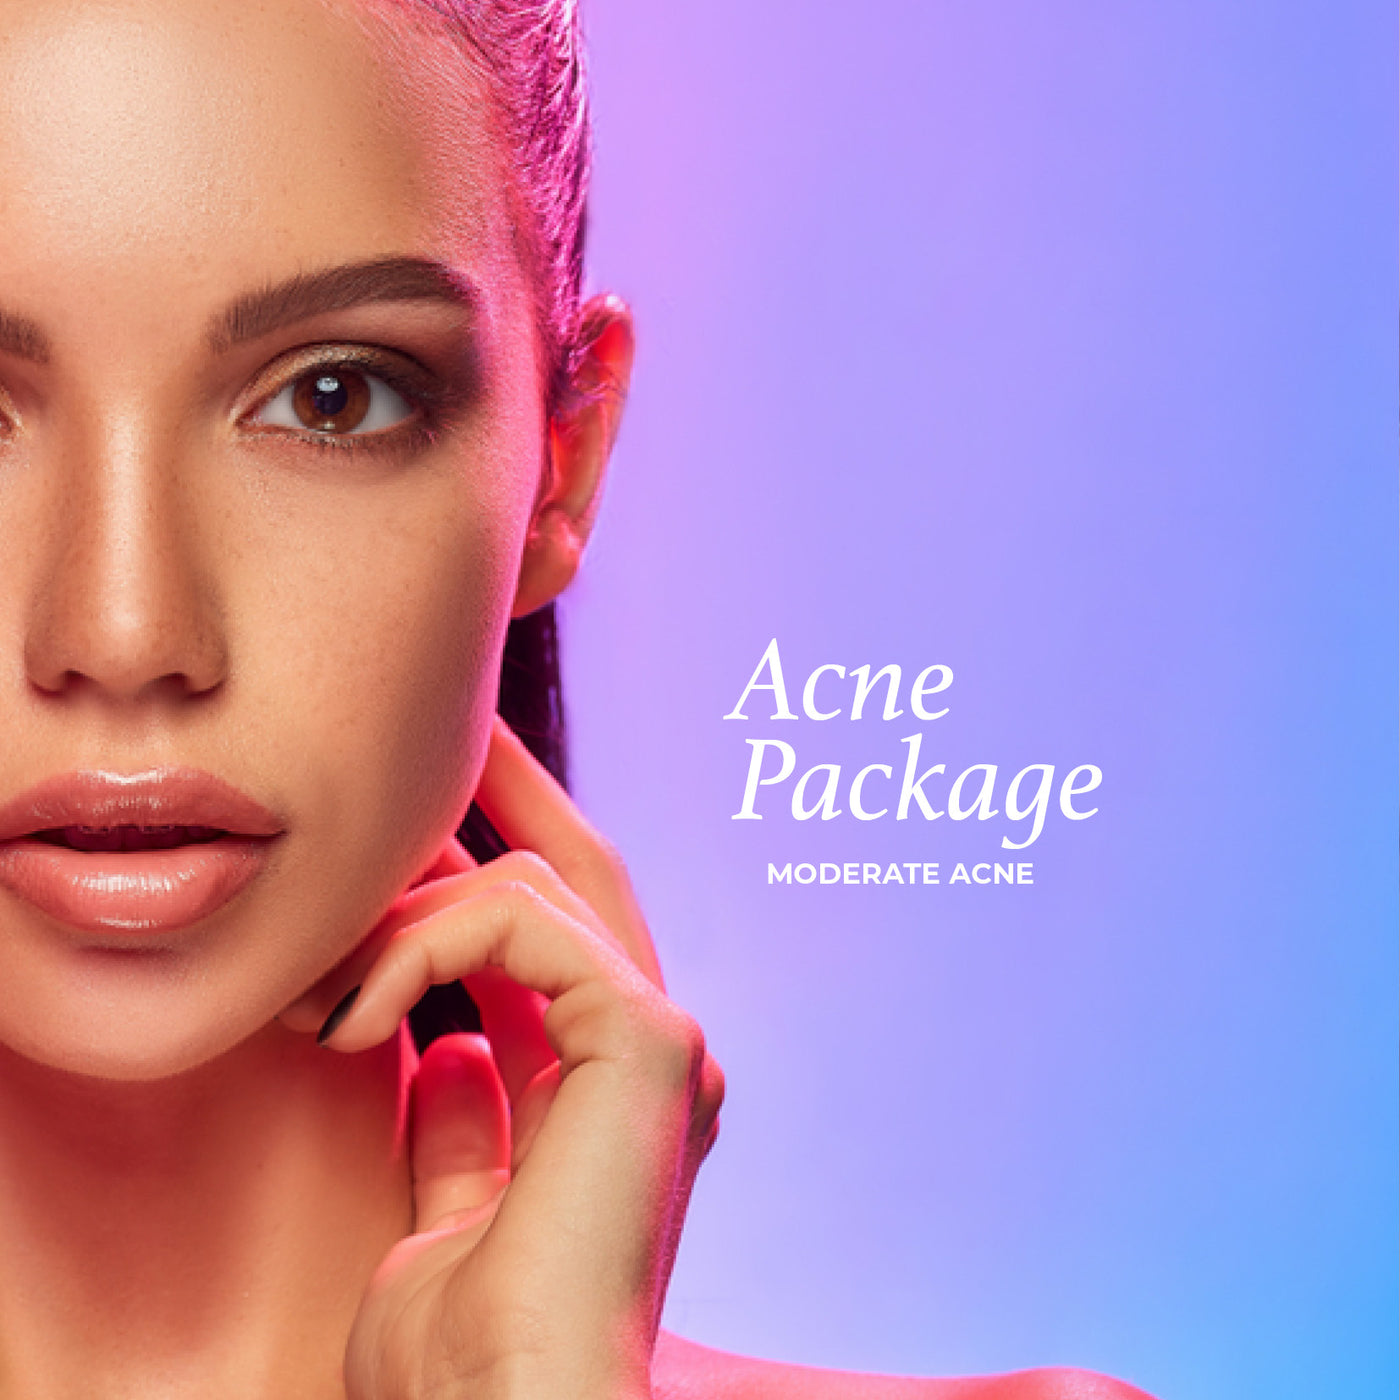 Acne Package - Moderate